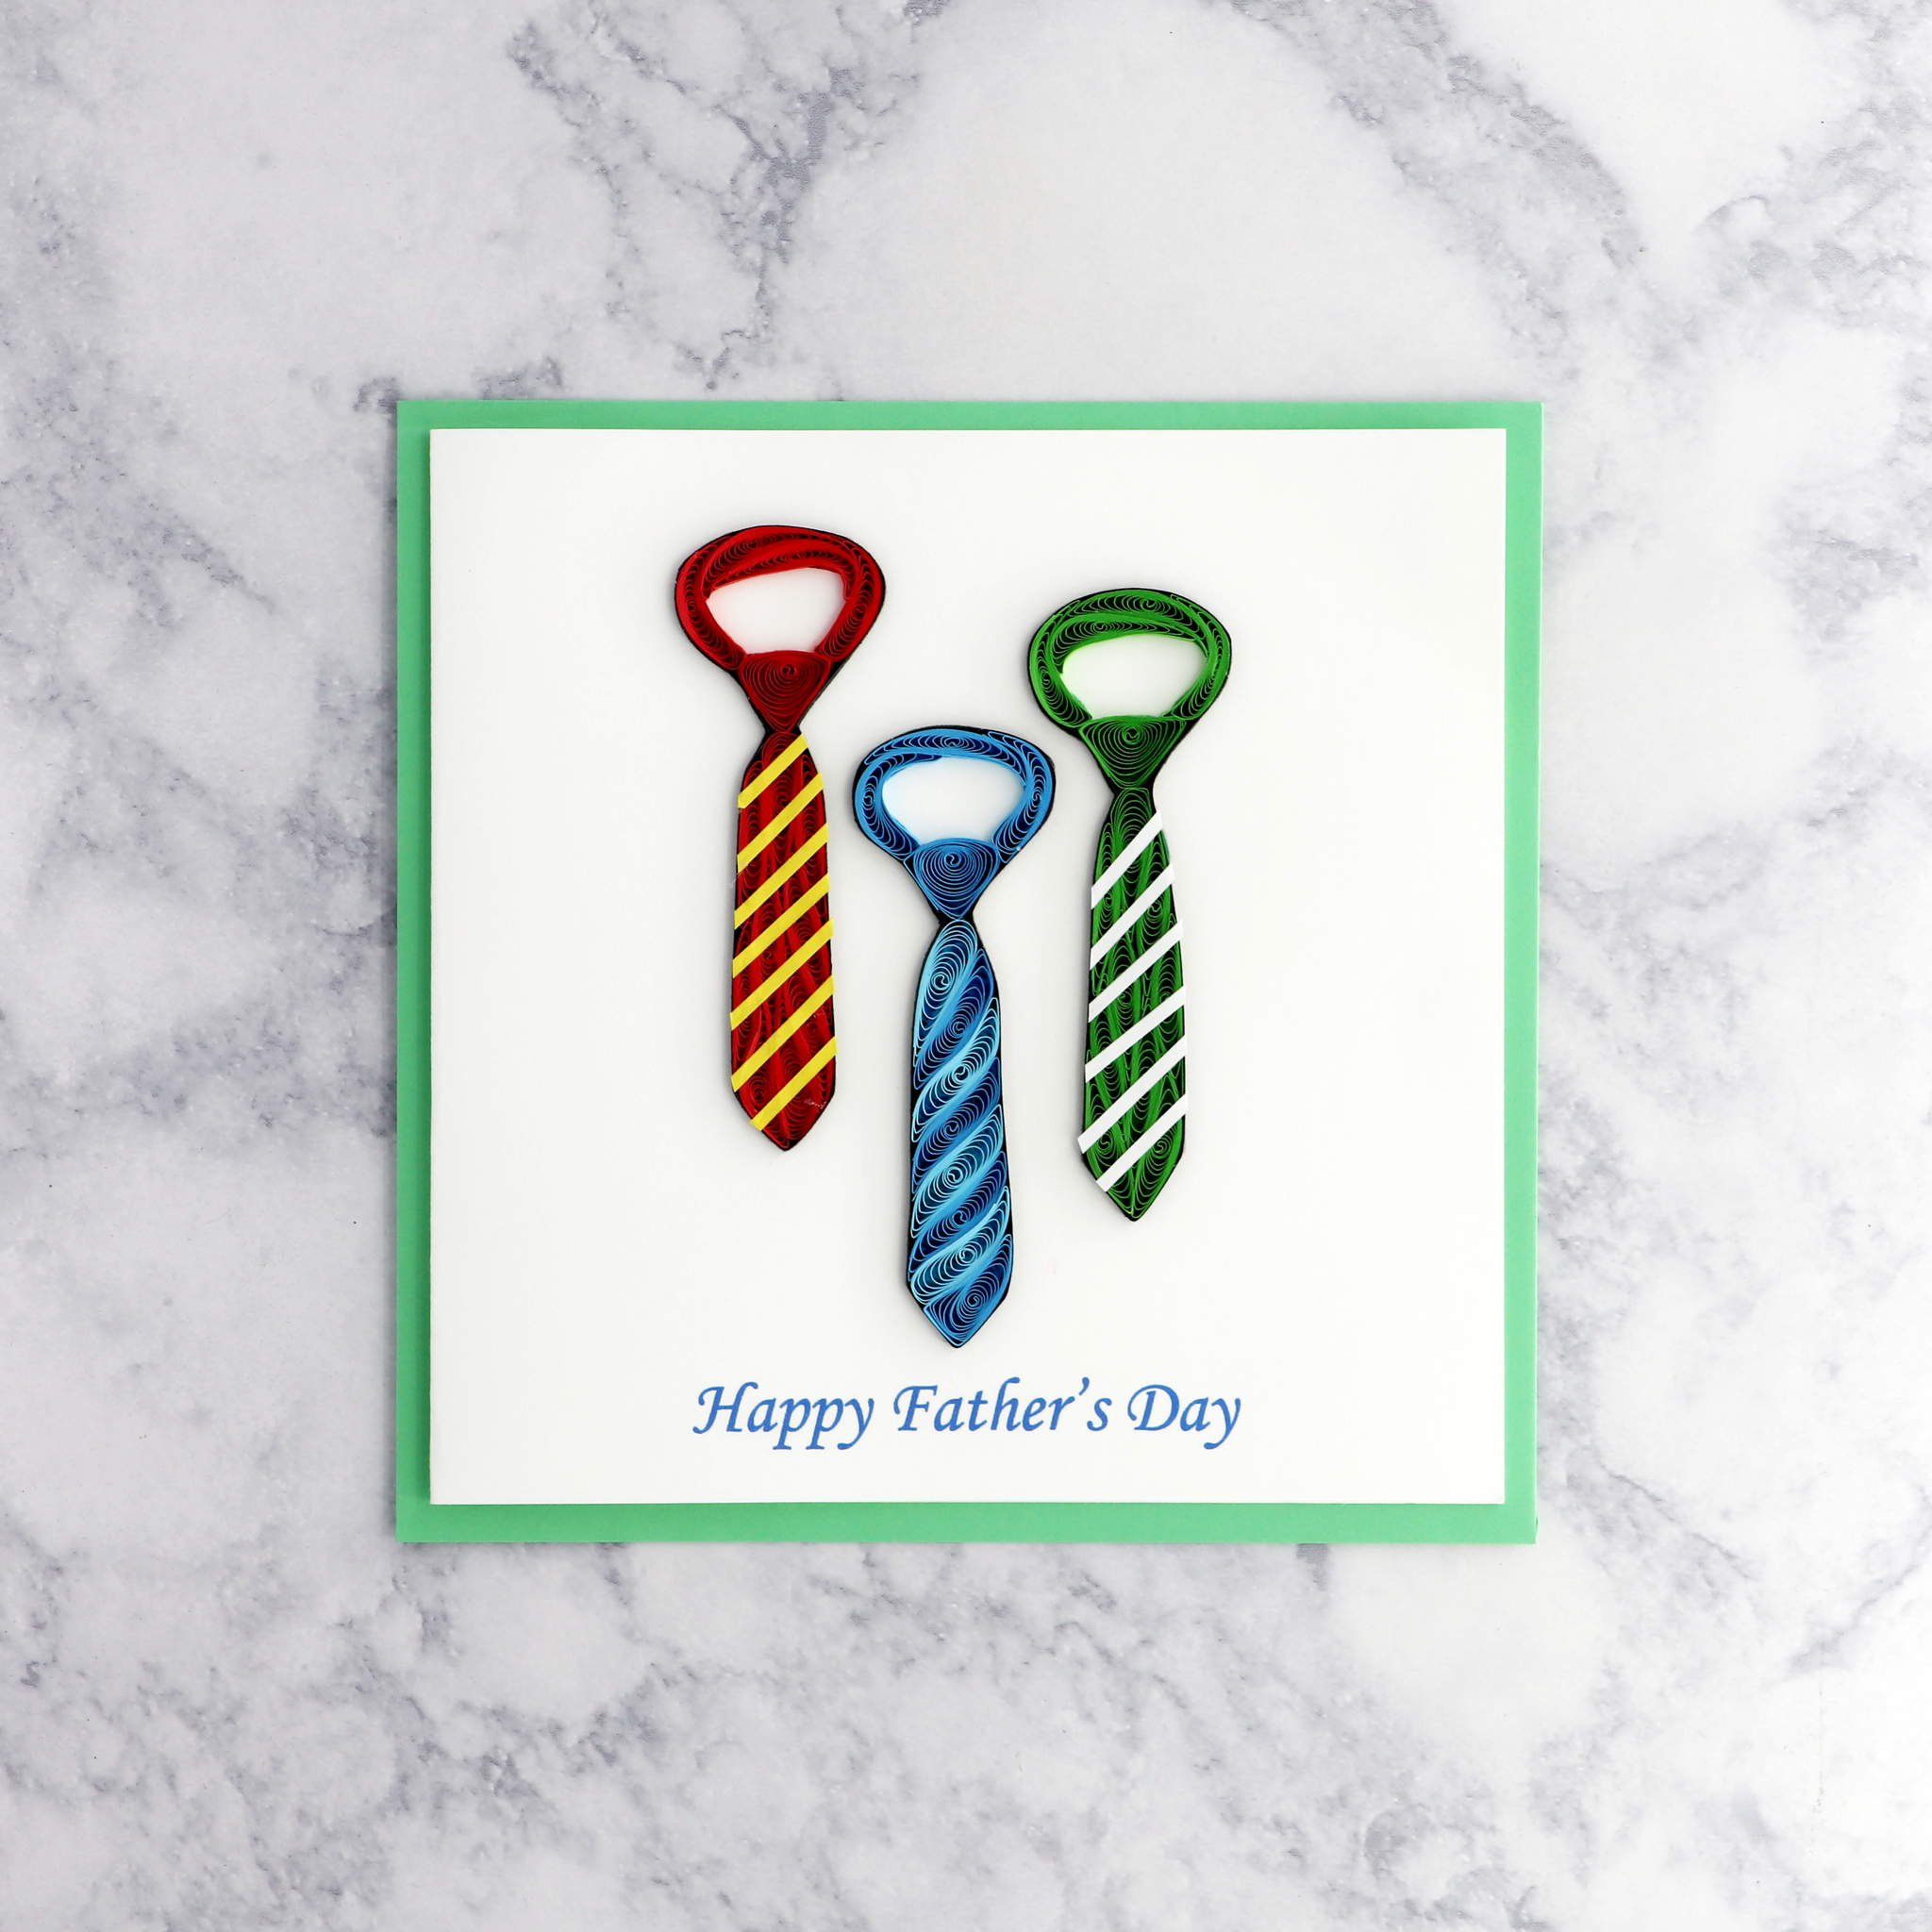 Handmade Dress Ties Quilling Father's Day Card